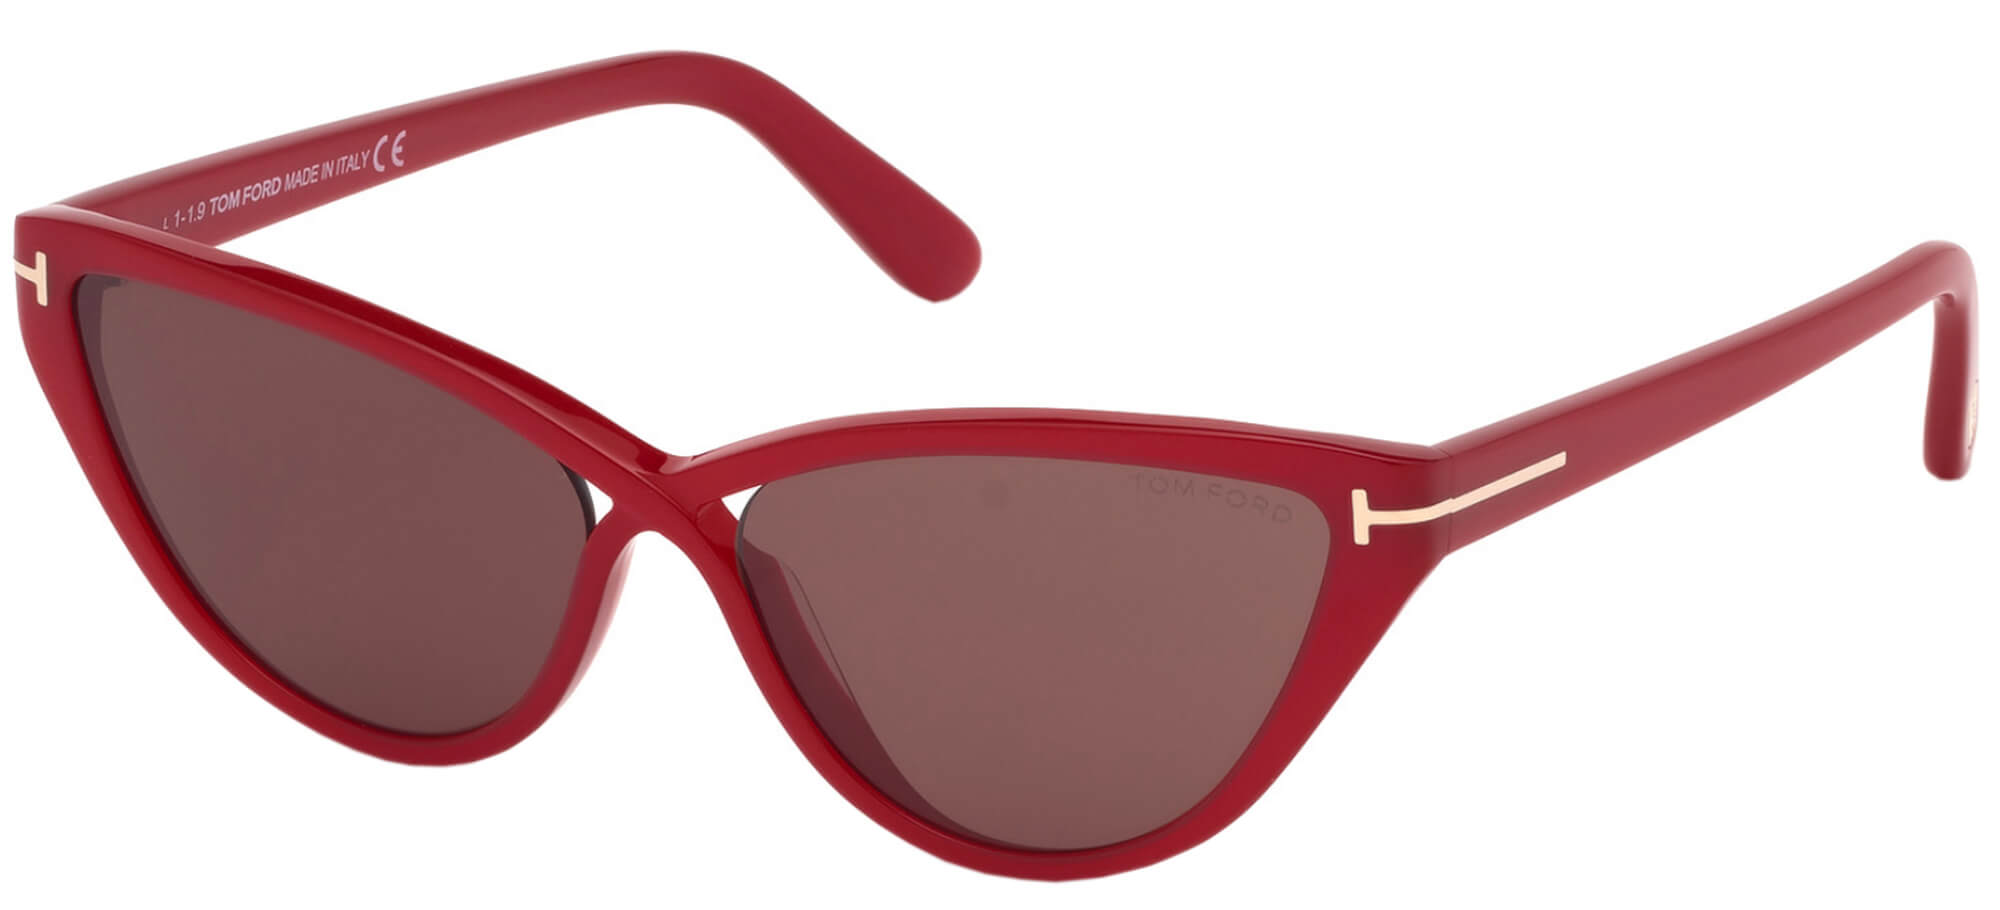 Tom FordCHARLIE-02 FT 0740Red/red (75Y)